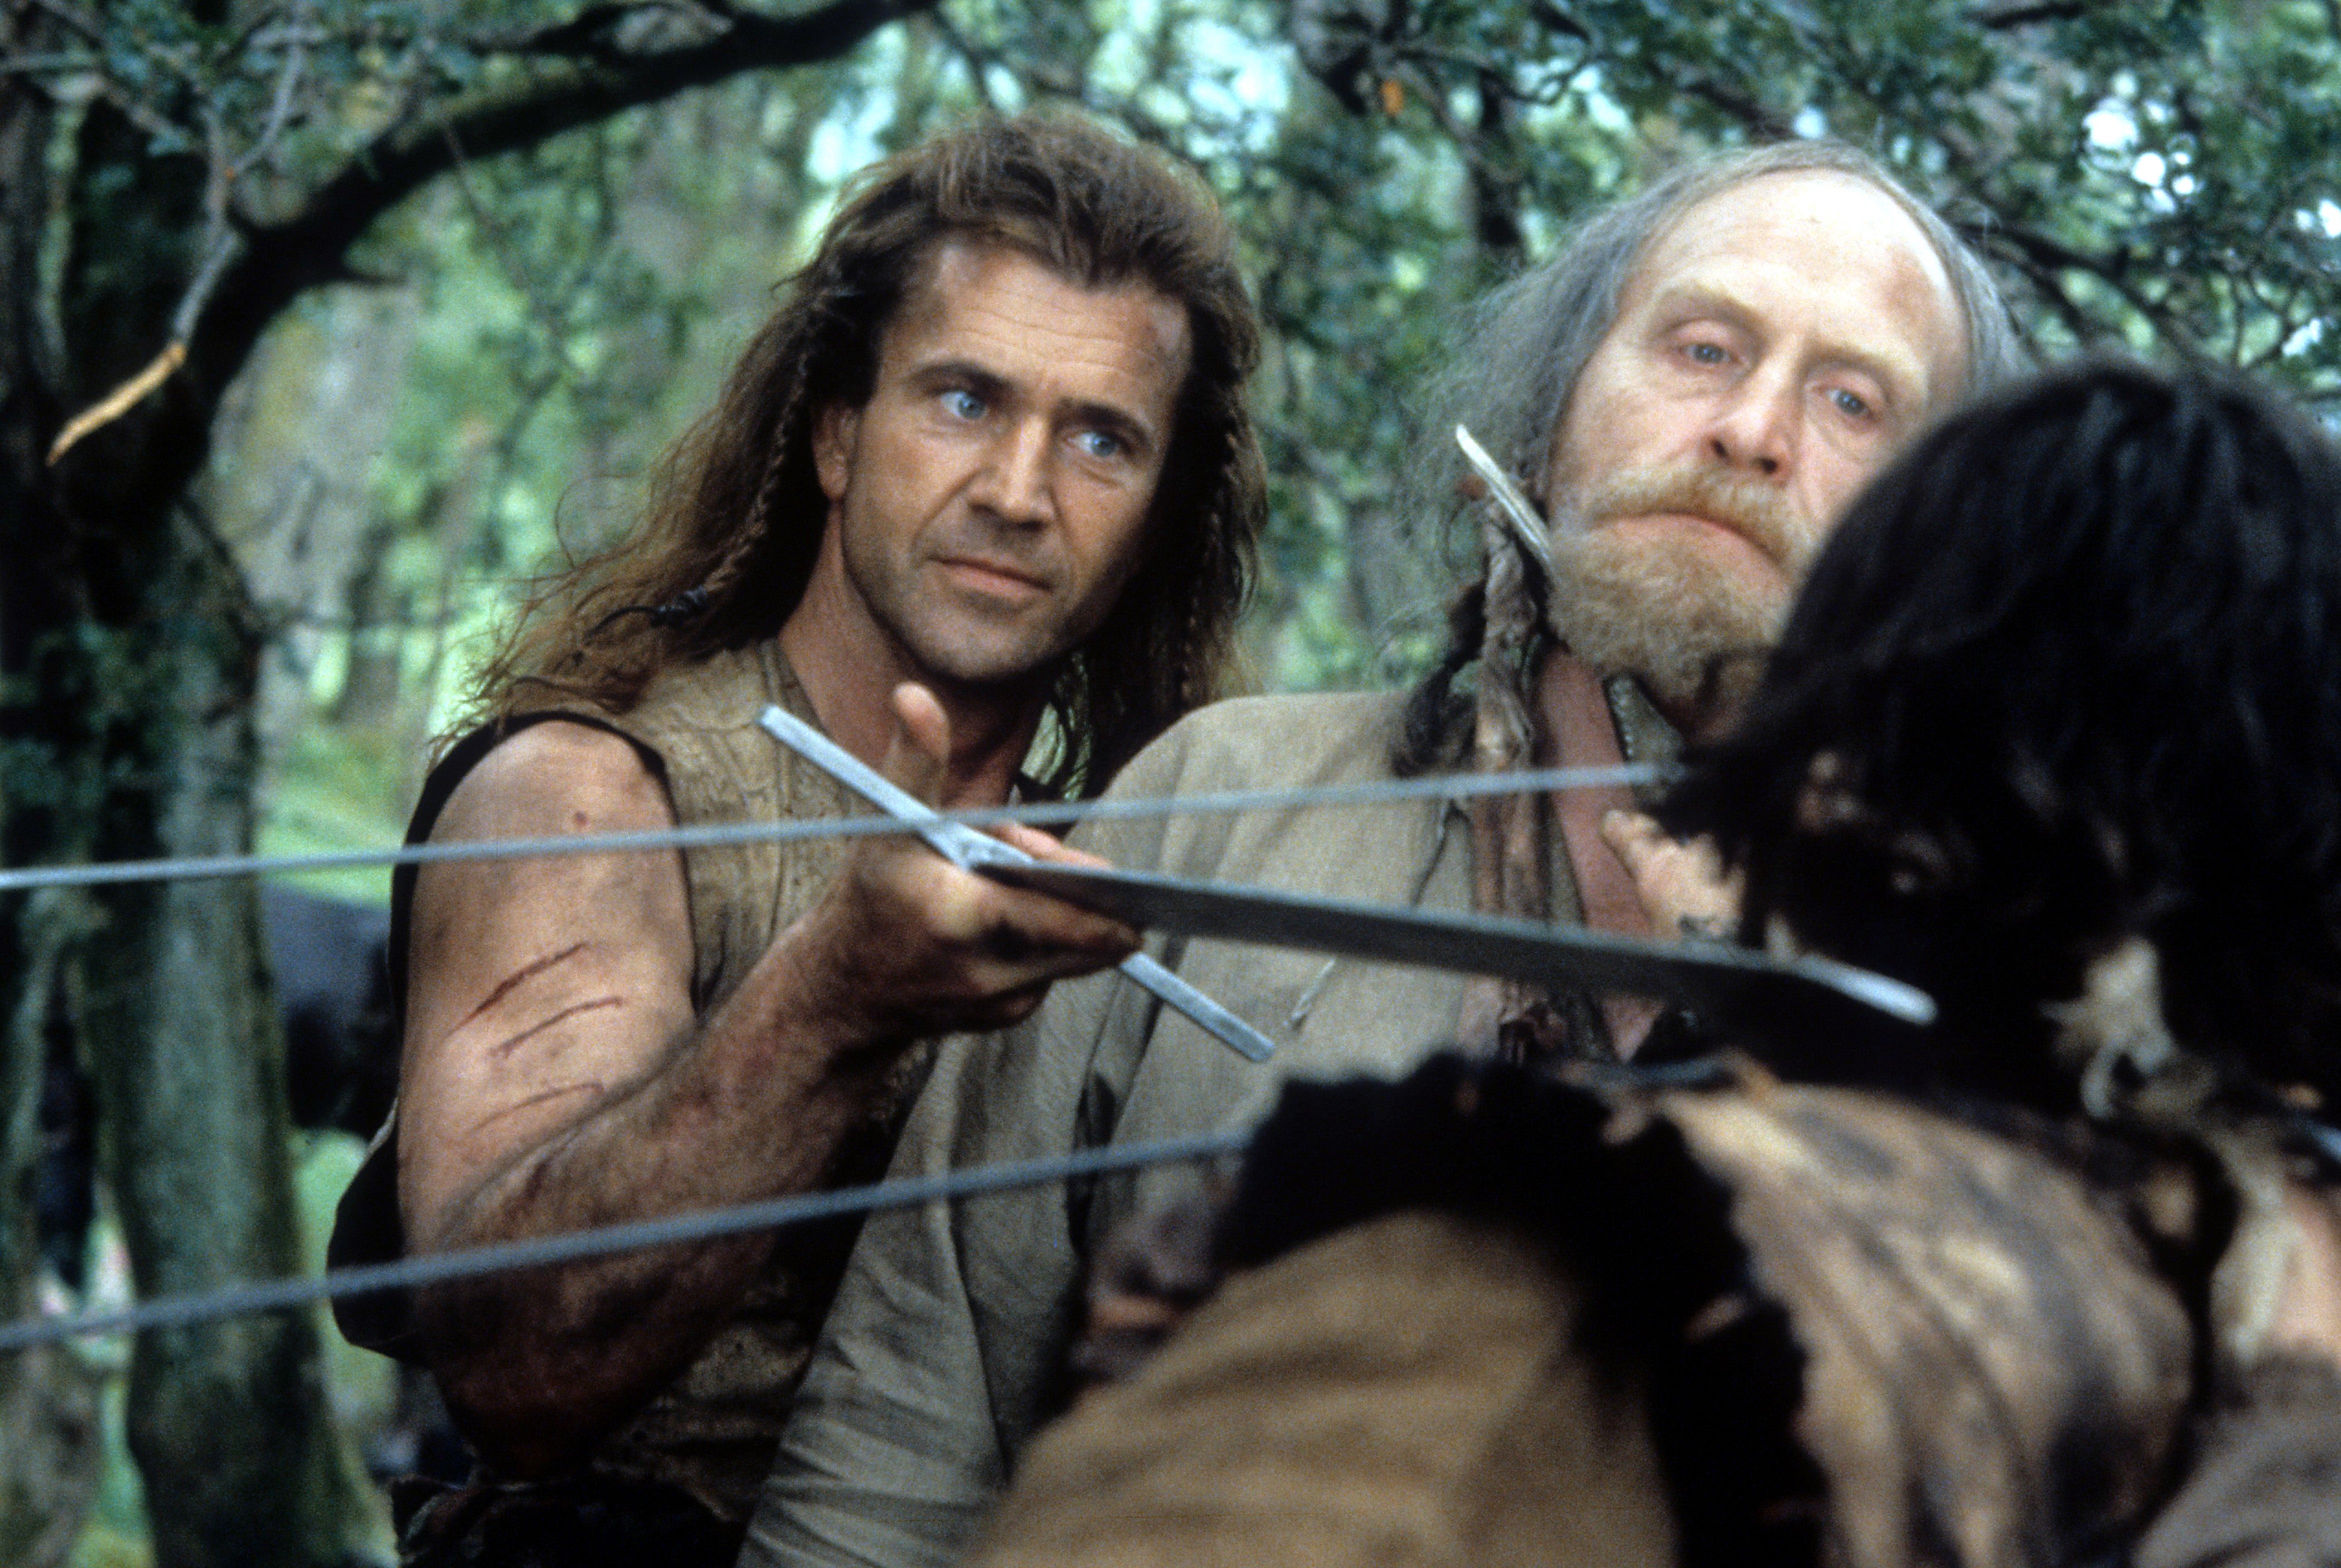 ‘Game of Thrones’ actor James Cosmo reflects on working with Mel Gibson in ‘Braveheart’: ‘A huge break’